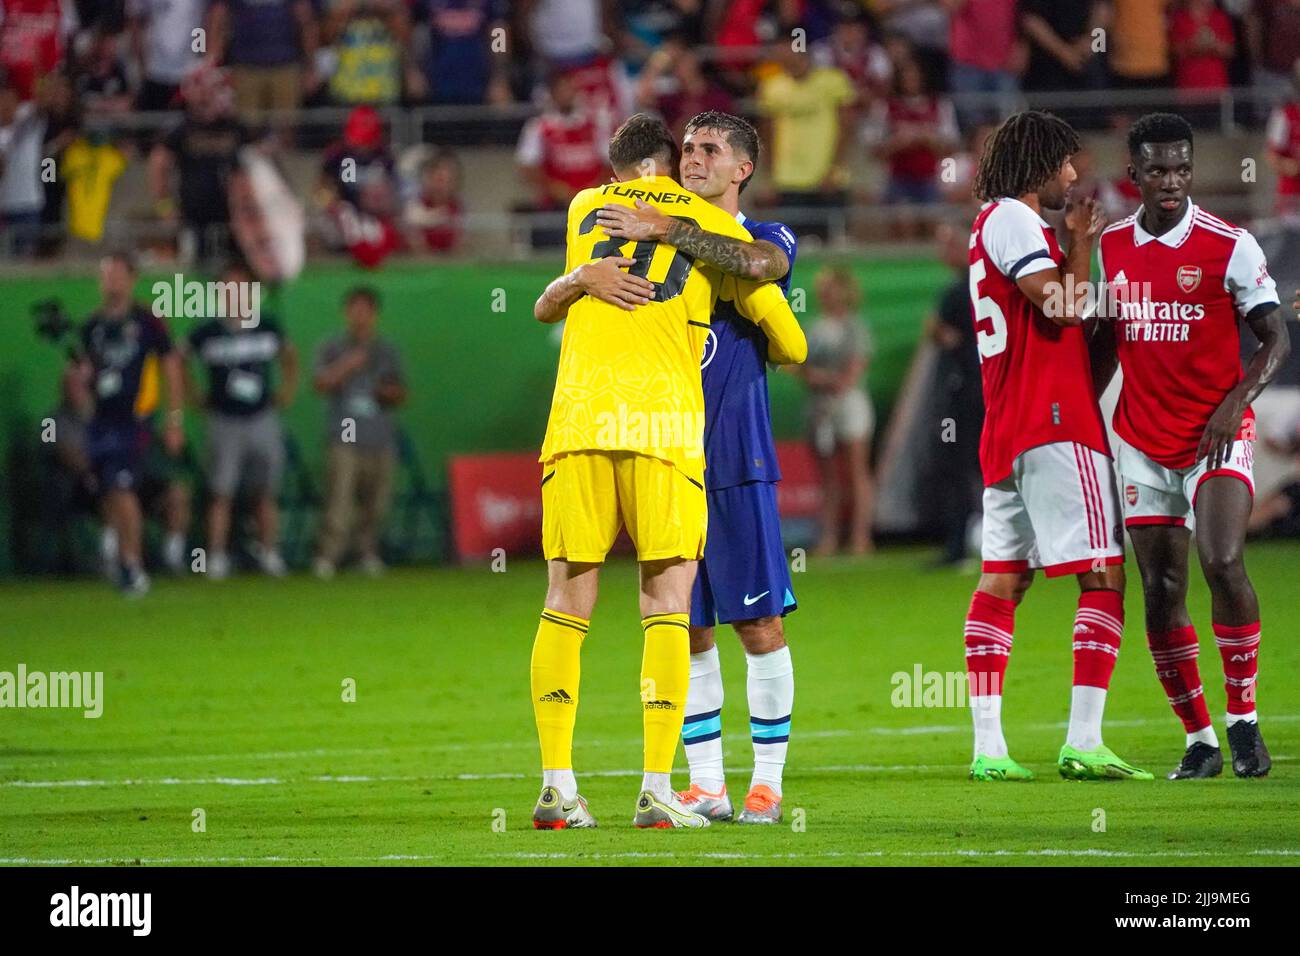 Orlando, Florida, USA, July 23, 2022, Chelsea Forward Christian Pulisic #10 and Arsenal Goalkeeper Matt Turne #30 share a hug and the end of the match at Camping World Stadium in a Friendly Match.  (Photo Credit:  Marty Jean-Louis) Stock Photo